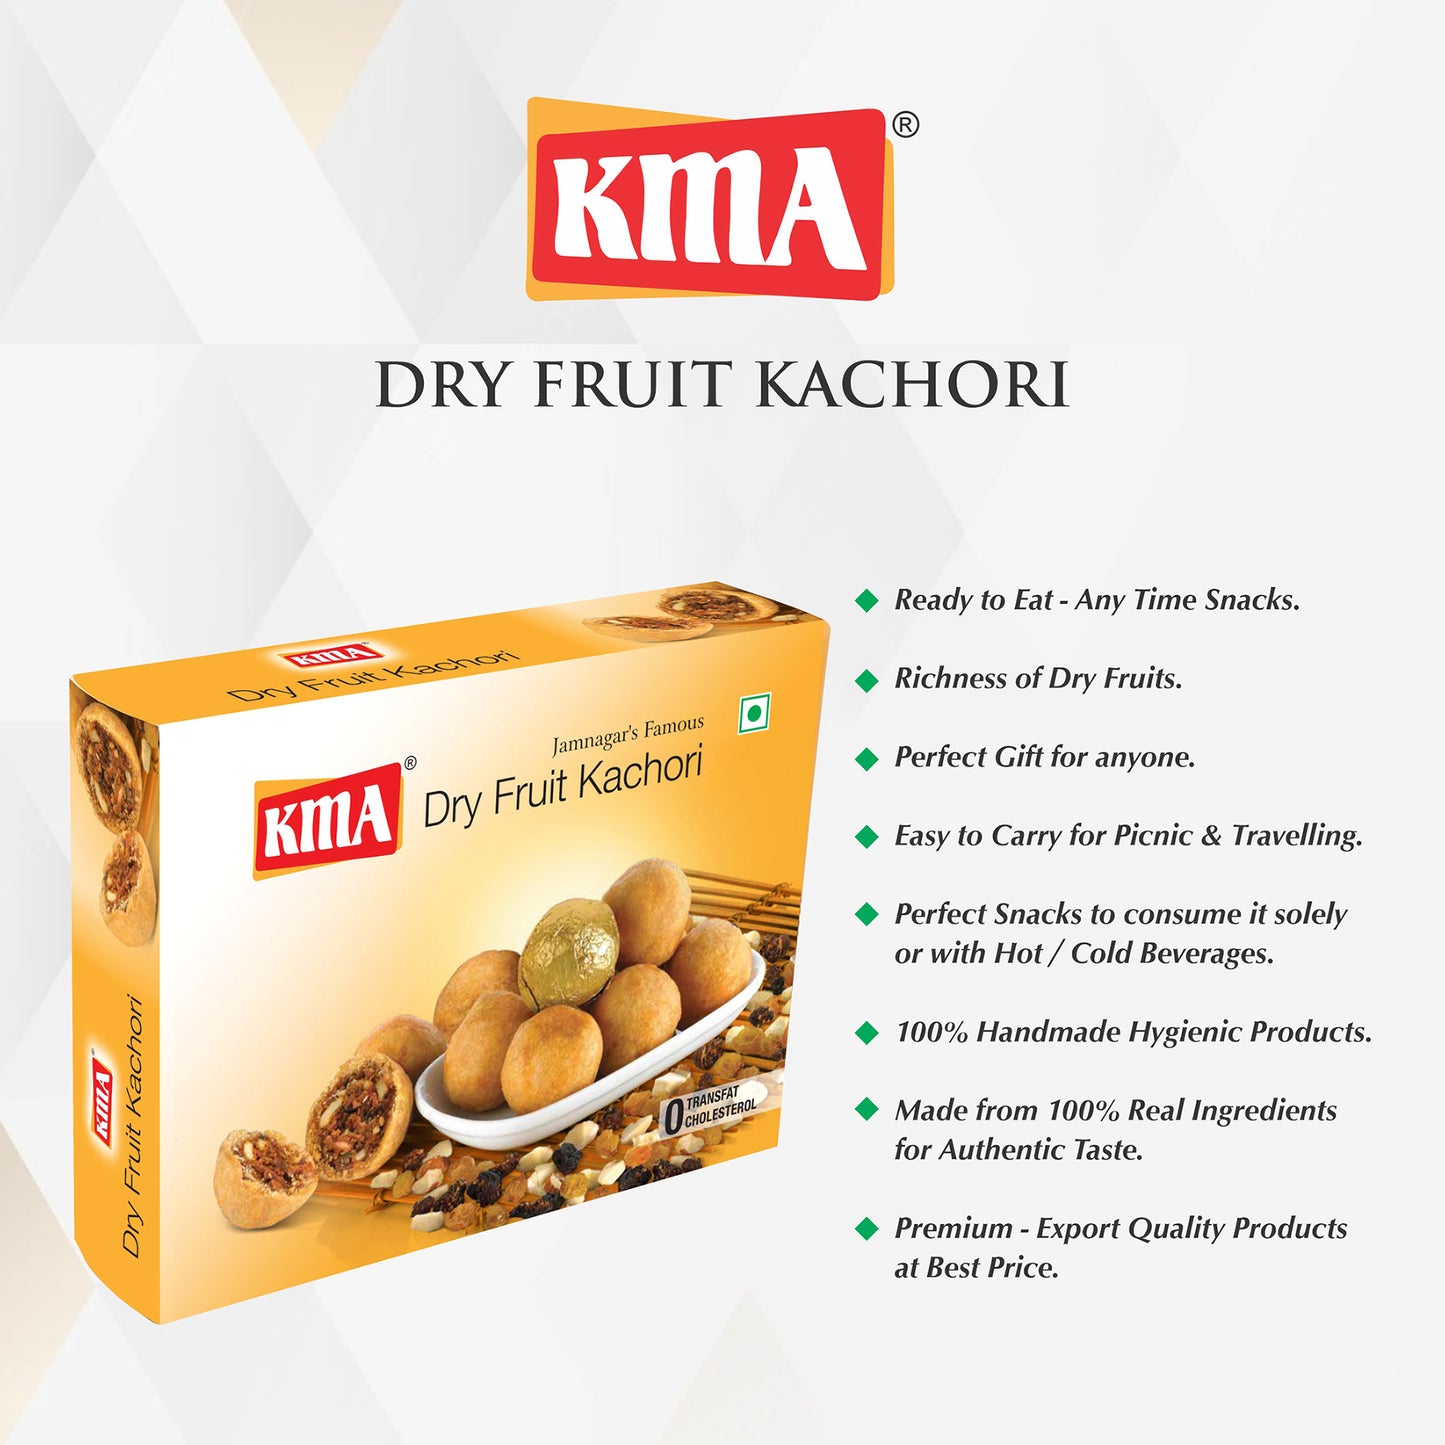 You can indulge guilt-free while enjoying the tasty namkeen. Rest assured, KMA Dry Fruit Kachori is a 100% vegetarian product of India. Order your pack of KMA Dry Fruit Kachori today and savor the authentic flavors of Gujarat. Enjoy this tasty Namkeen at Anytime, Anywhere.